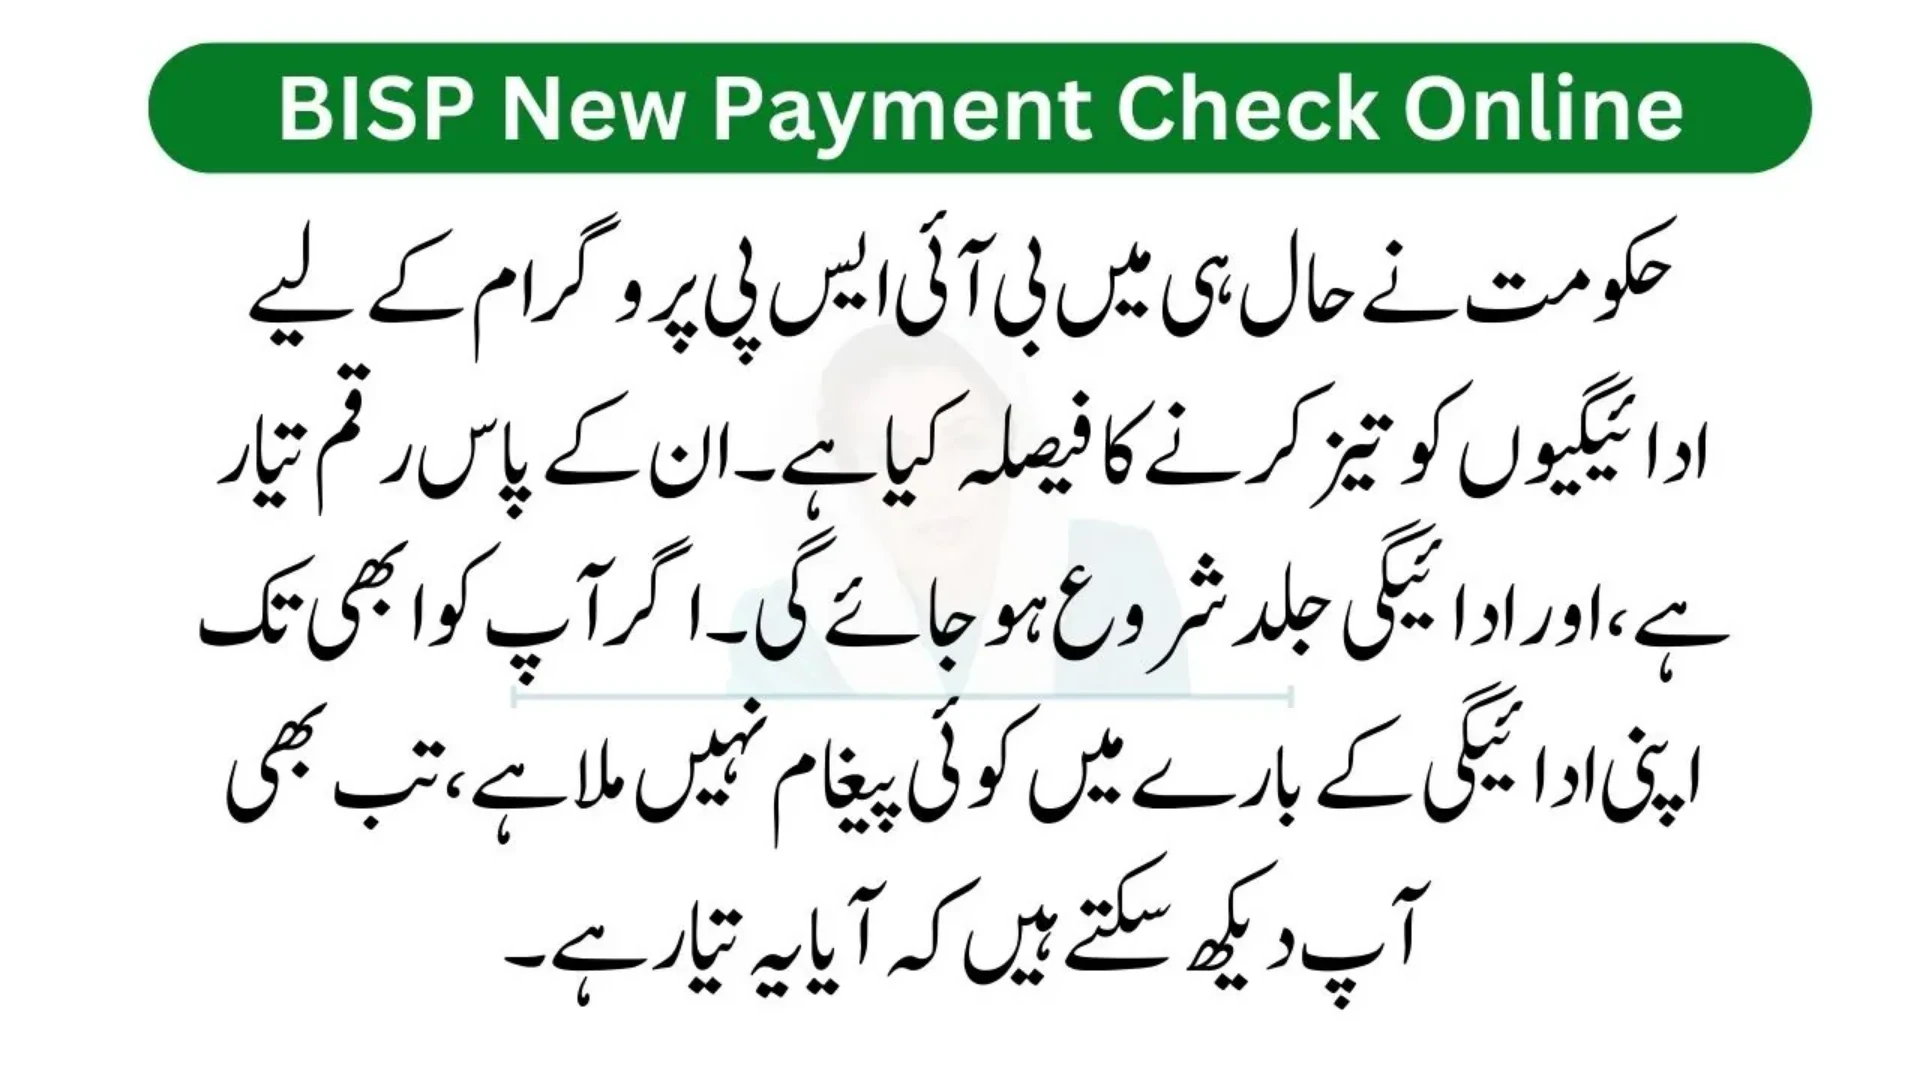 Online check of New Payment of BISP